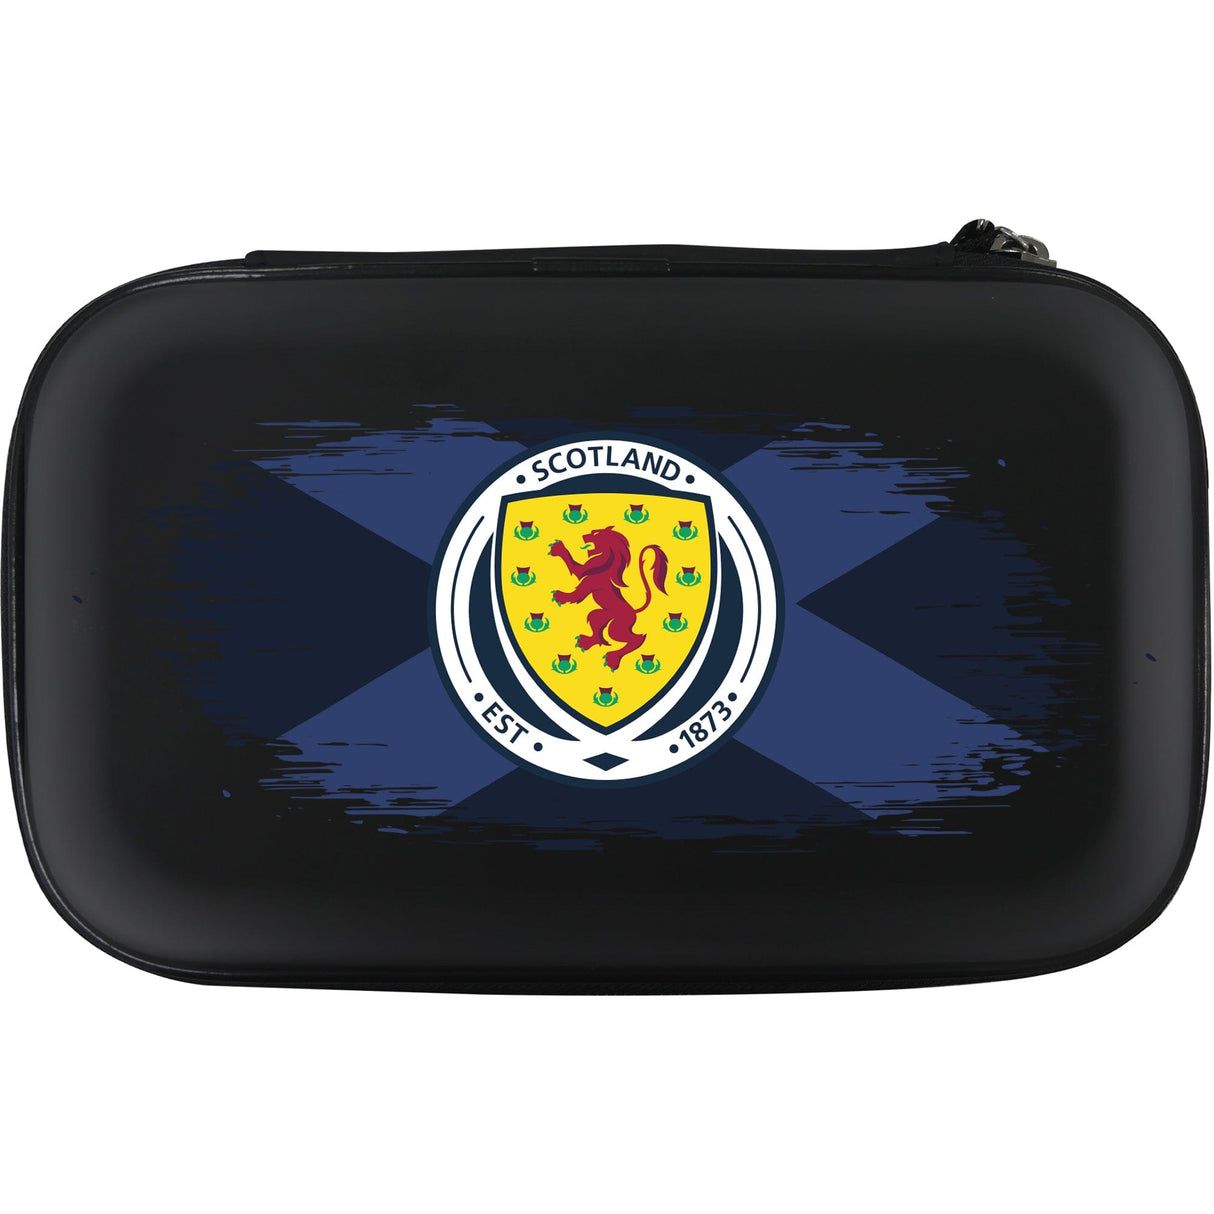 Scotland Football Darts Case - Official Licensed - Black - W2 - St Andrew - Navy Blue